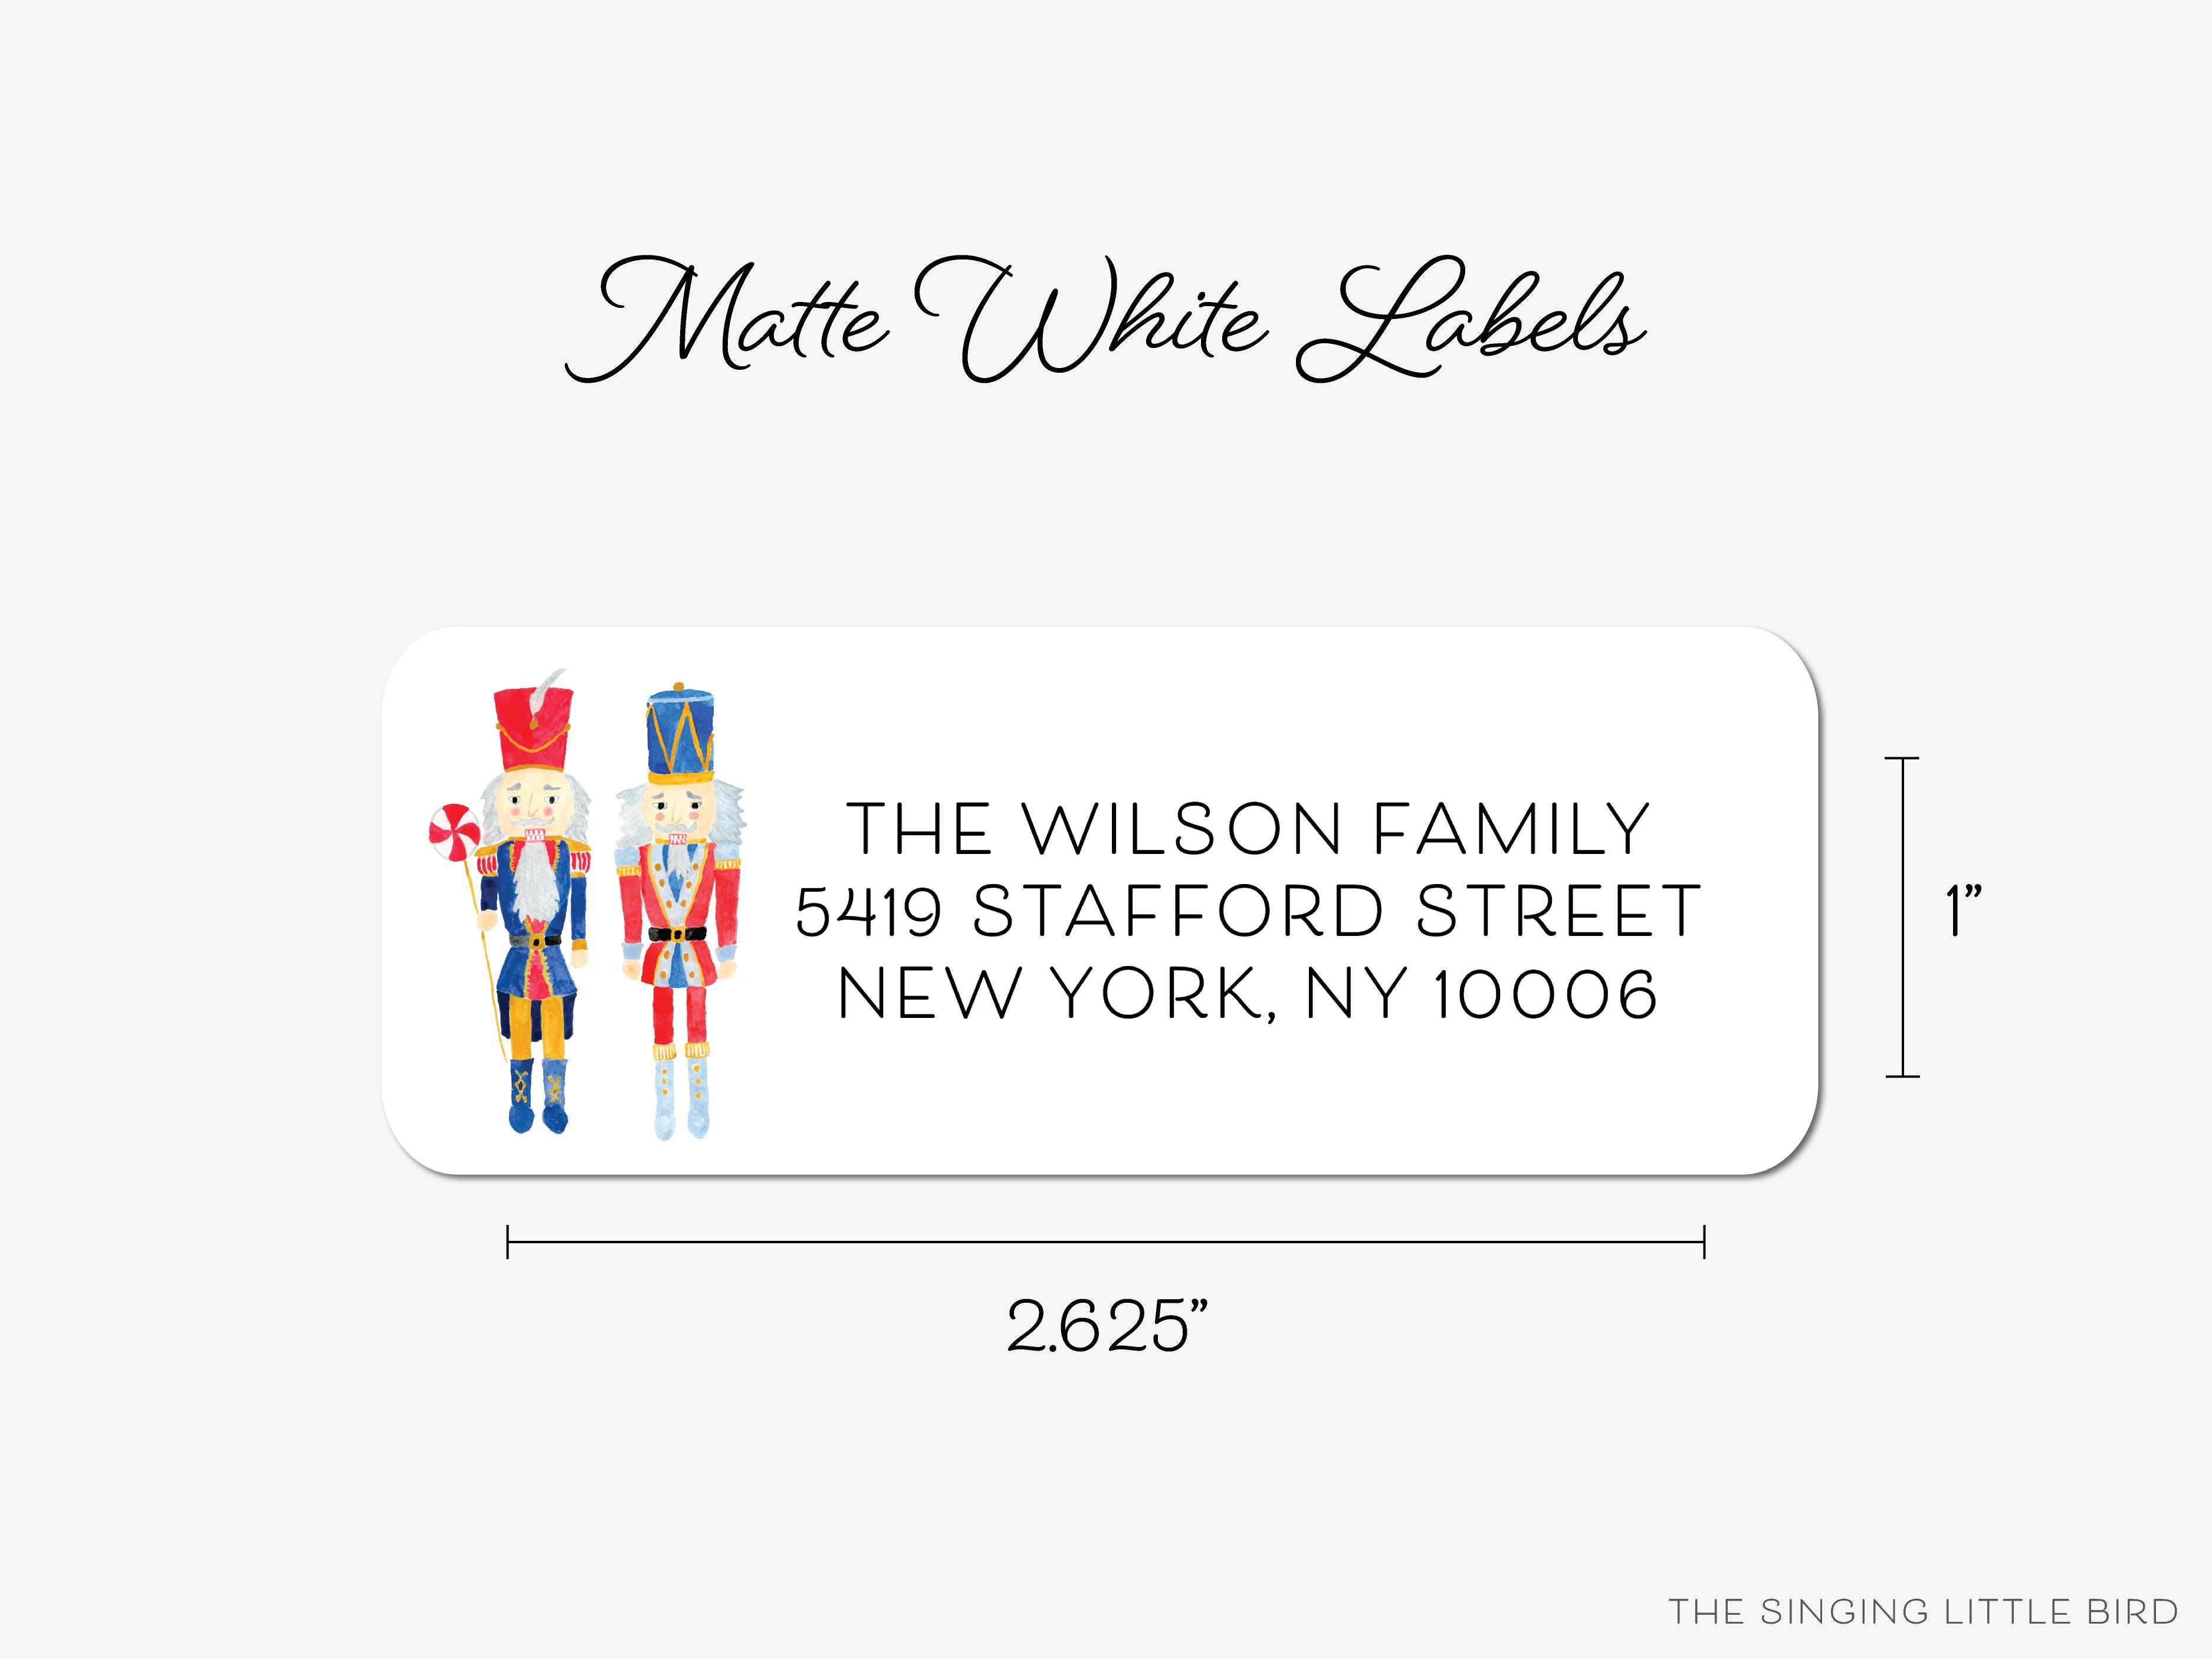 Nutcracker Return Address Labels-These personalized return address labels are 2.625" x 1" and feature our hand-painted watercolor Nutcrackers, printed in the USA on beautiful matte finish labels. These make great gifts for yourself or the Christmas lover.-The Singing Little Bird